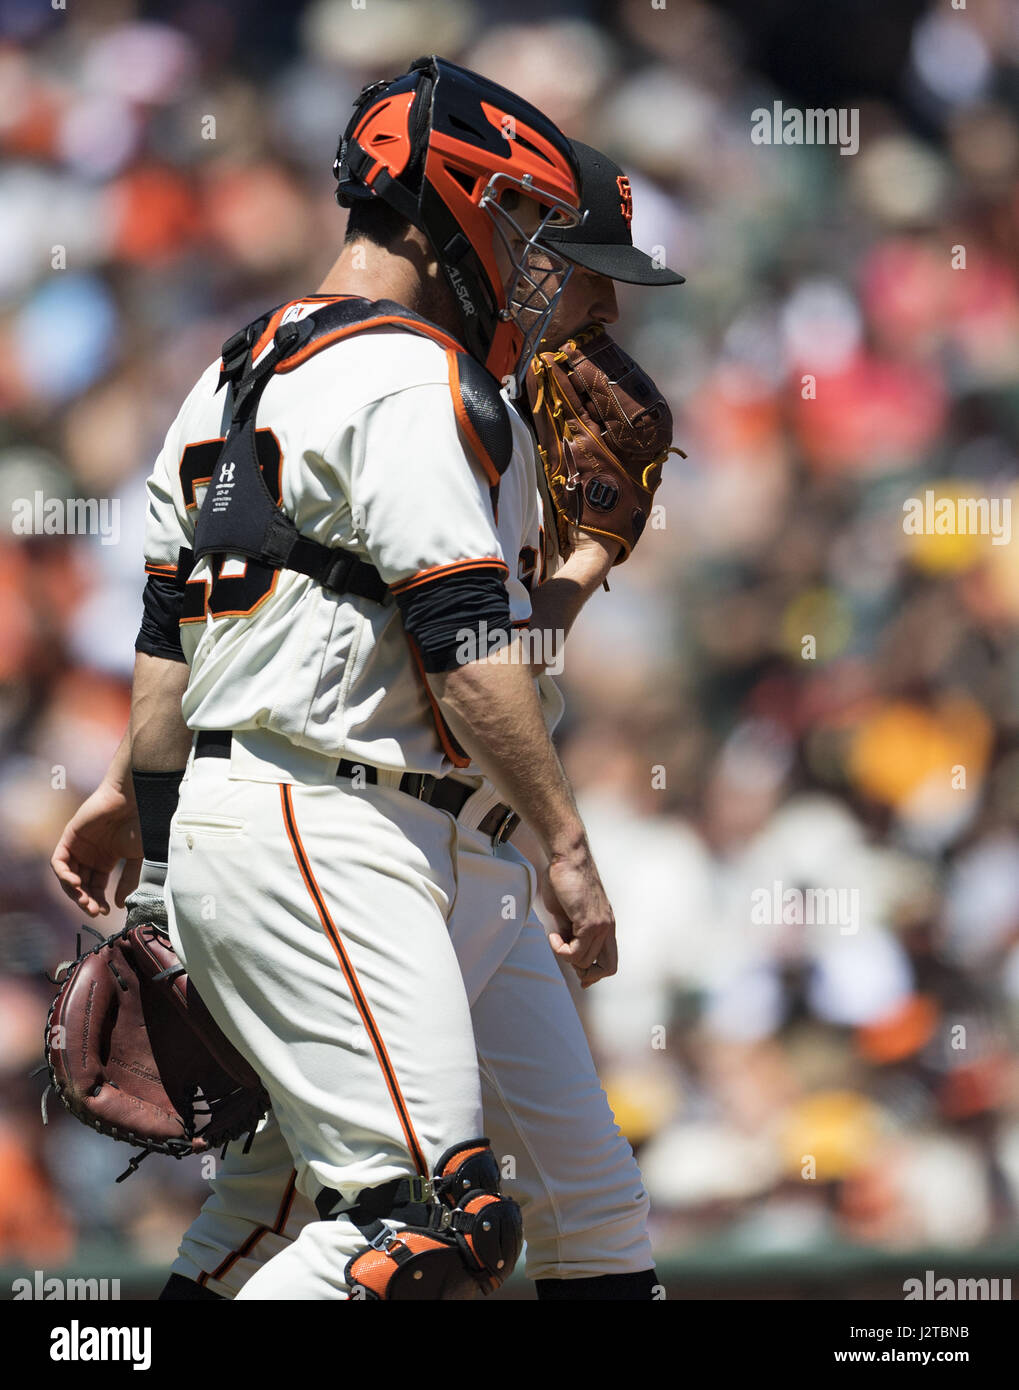 San Francisco, California, USA. 30th Apr, 2017. San Francisco Giants catcher Buster Posey (28) walks San Francisco Giants starting pitcher Ty Blach (50) back to the mound, sharing a strategy for the next pitch the during a MLB game between the San Diego Padres and the San Francisco Giants at AT&T Park in San Francisco, California. Valerie Shoaps/CSM/Alamy Live News Stock Photo